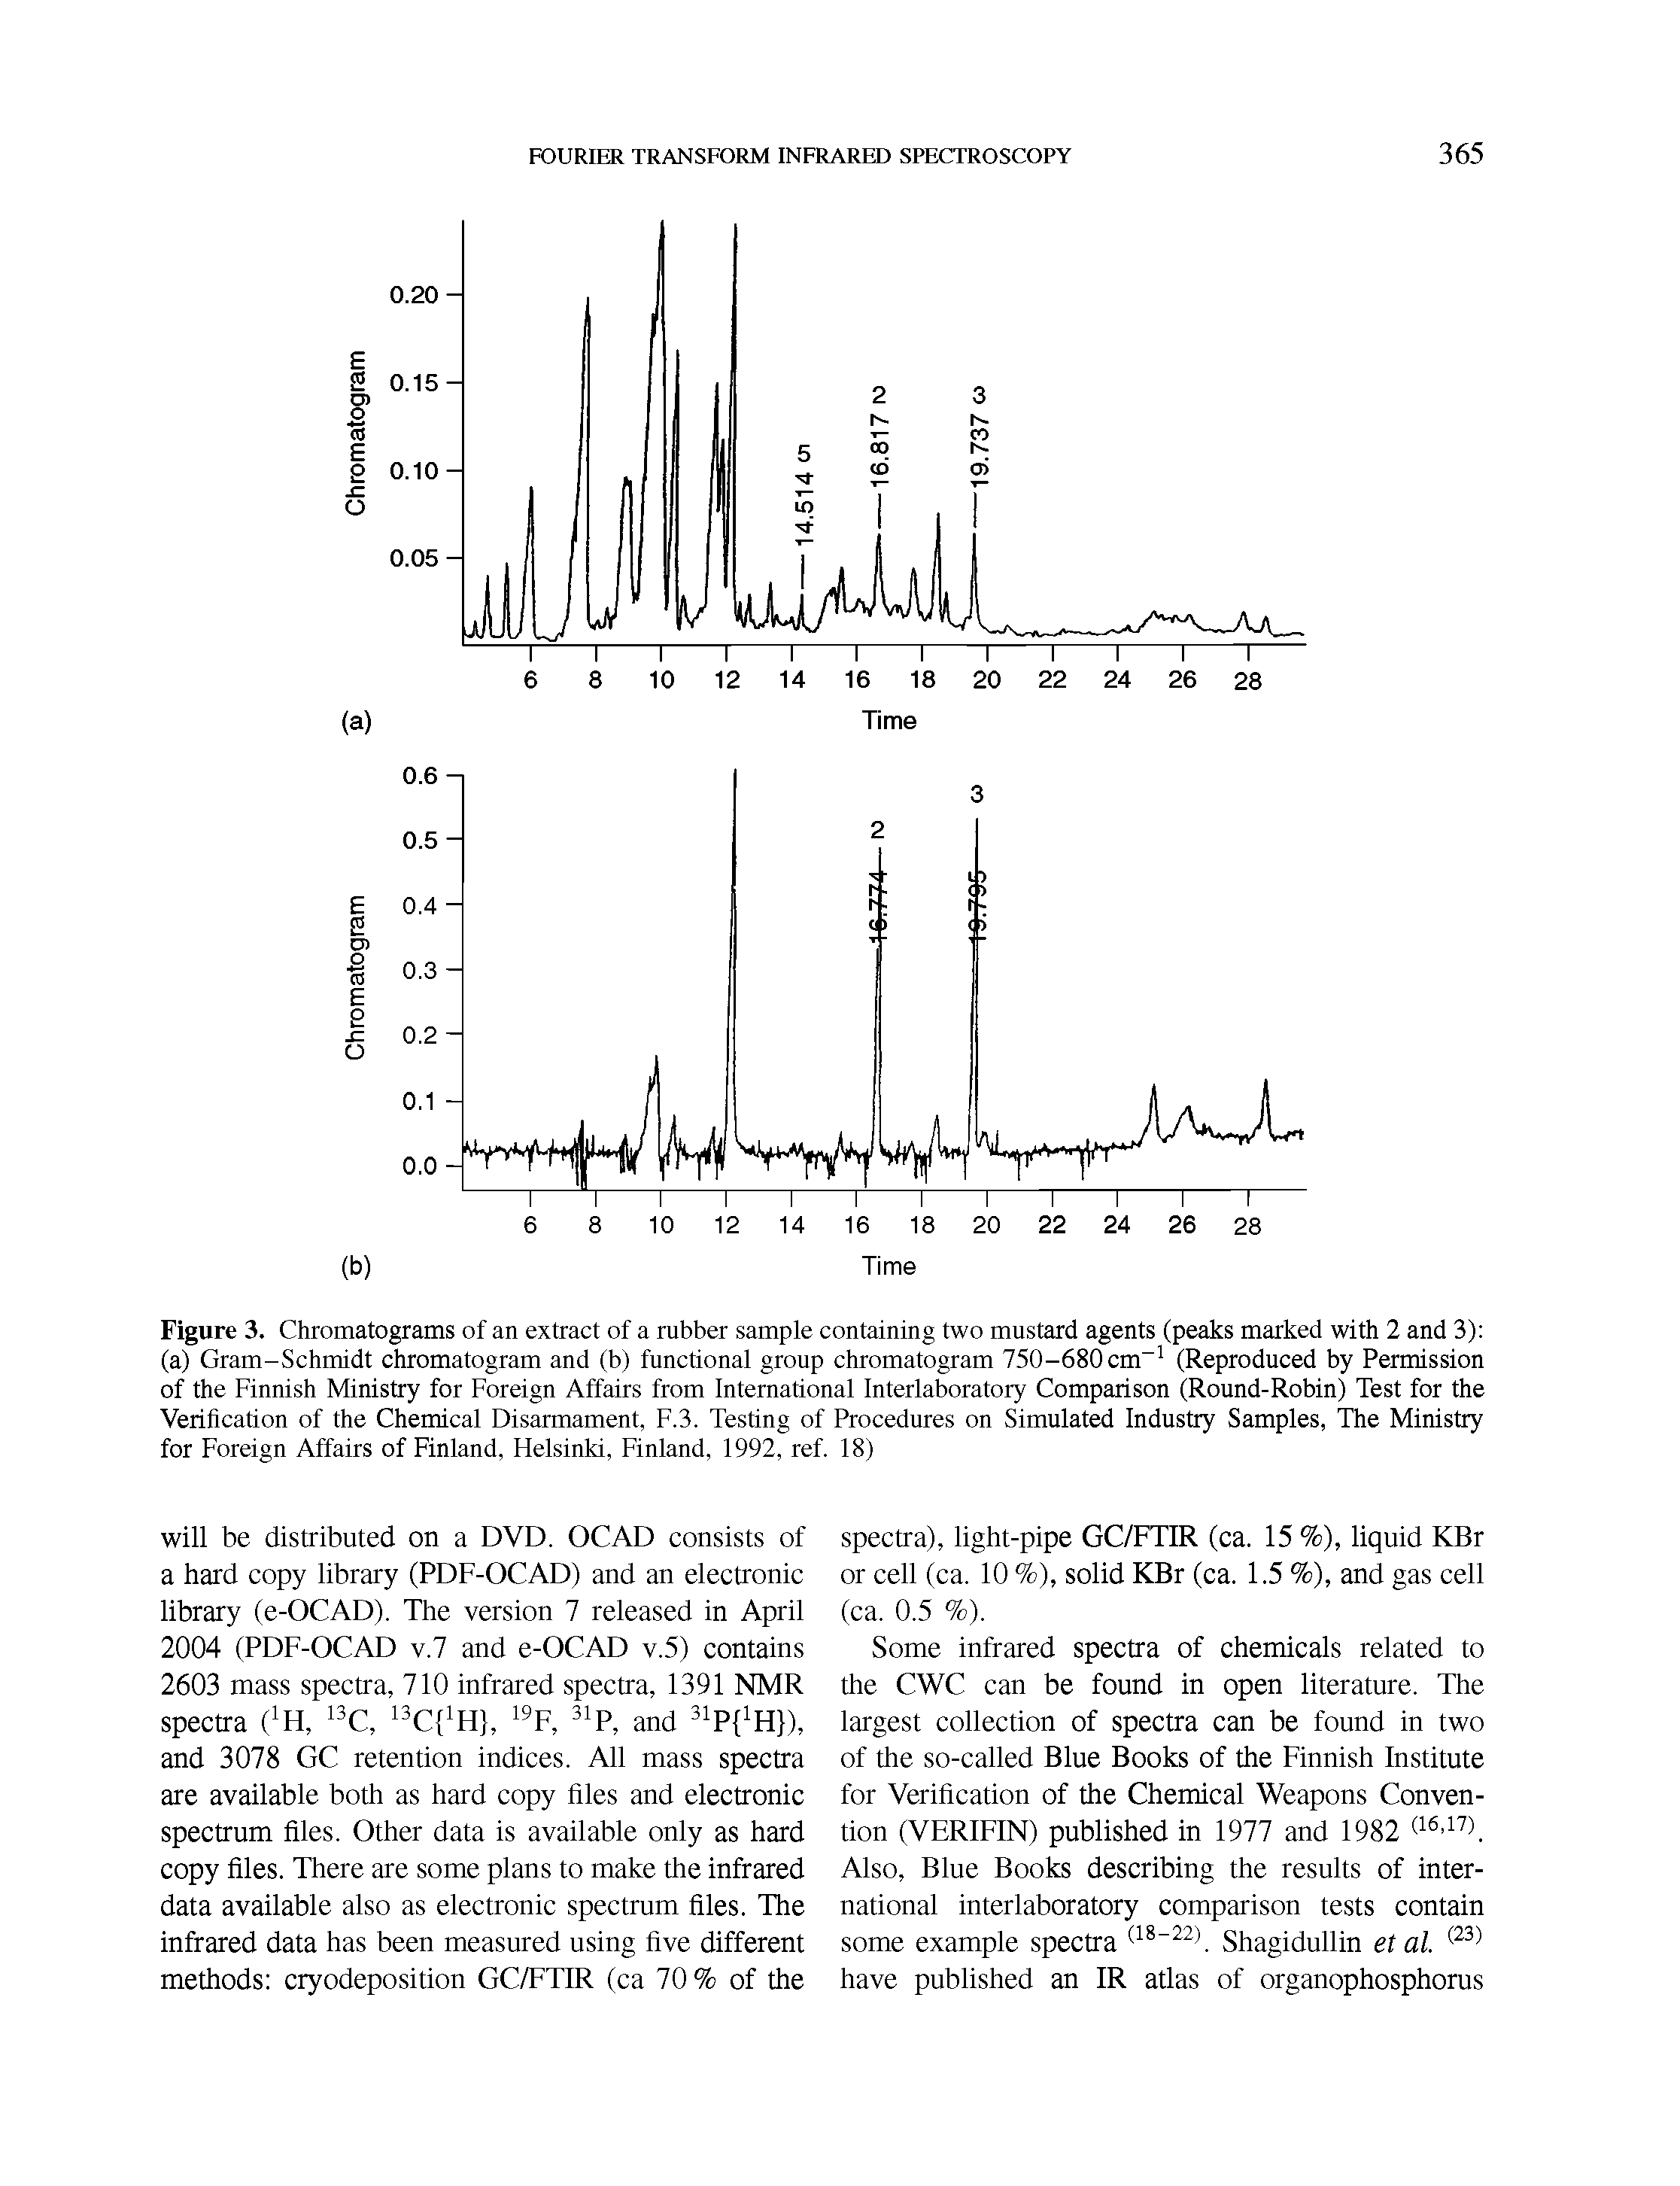 Figure 3. Chromatograms of an extract of a rubber sample containing two mustard agents (peaks marked with 2 and 3) (a) Gram-Schmidt chromatogram and (b) functional group chromatogram 750-680 cm-1 (Reproduced by Permission of the Finnish Ministry for Foreign Affairs from International Interlaboratory Comparison (Round-Robin) Test for the Verification of the Chemical Disarmament, F.3. Testing of Procedures on Simulated Industry Samples, The Ministry for Foreign Affairs of Finland, Helsinki, Finland, 1992, ref. 18)...